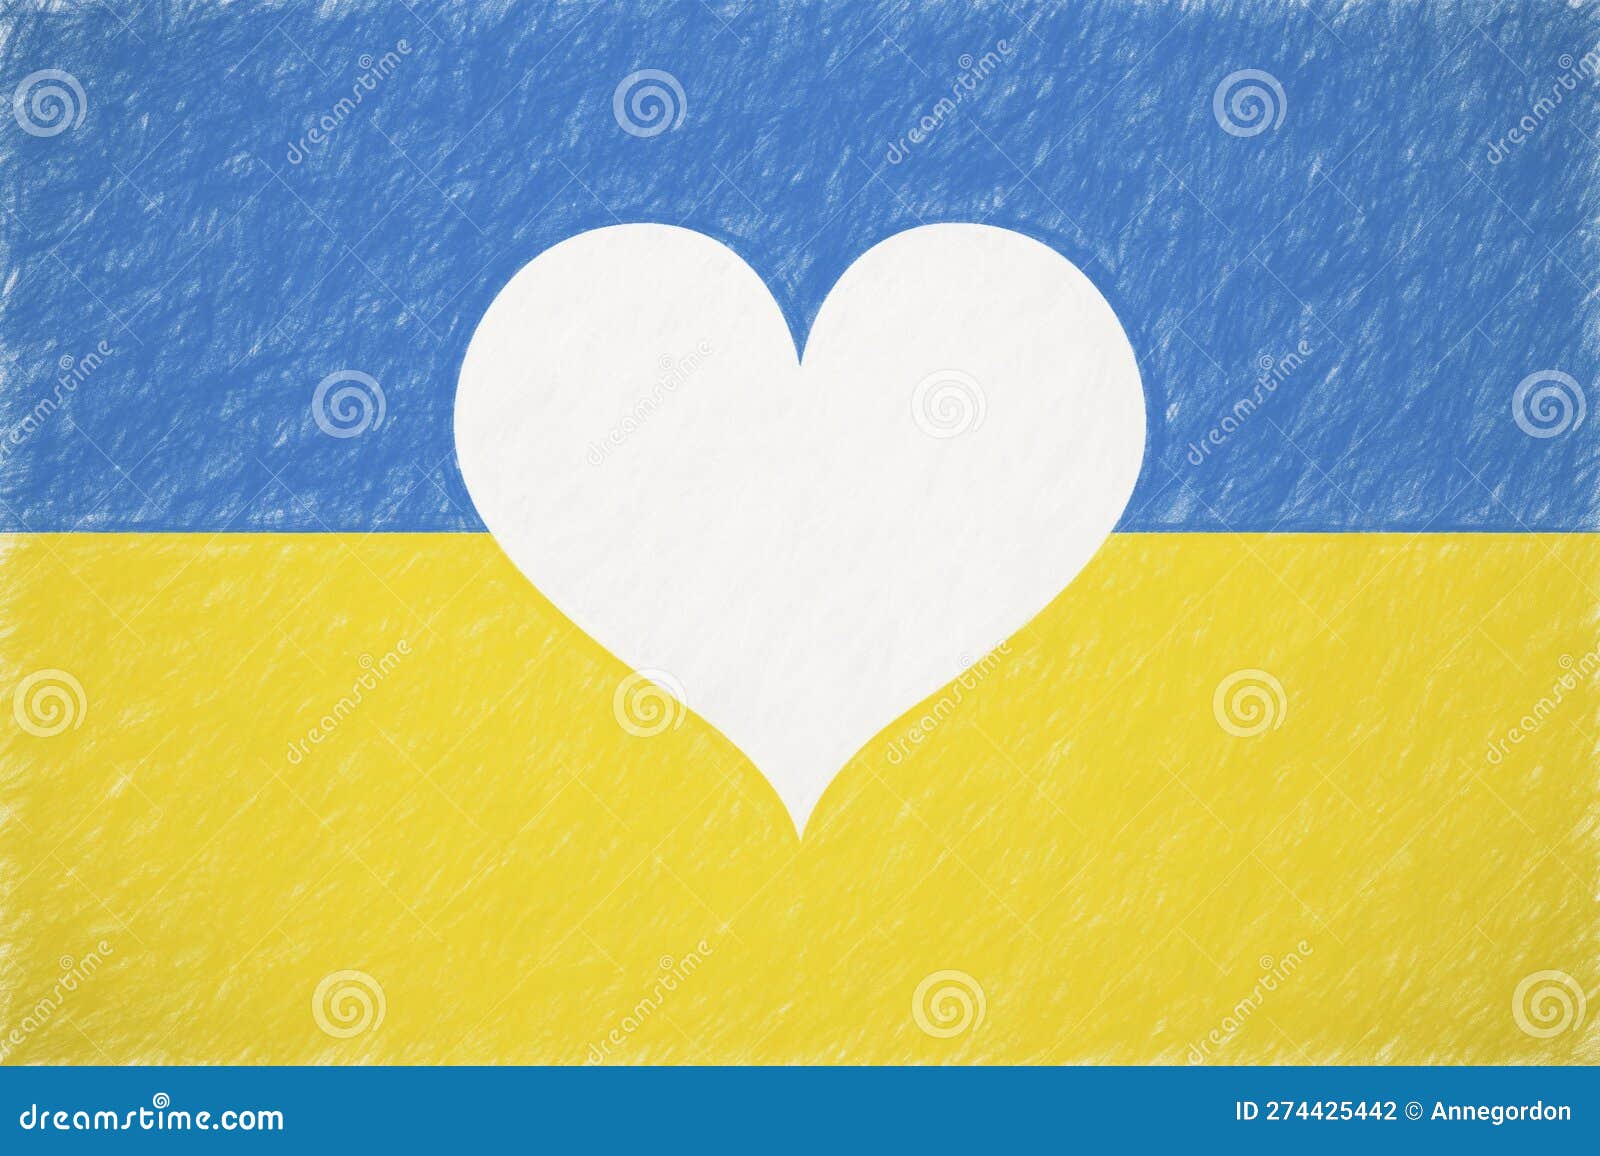 drawing of the flag of ukraine with heart